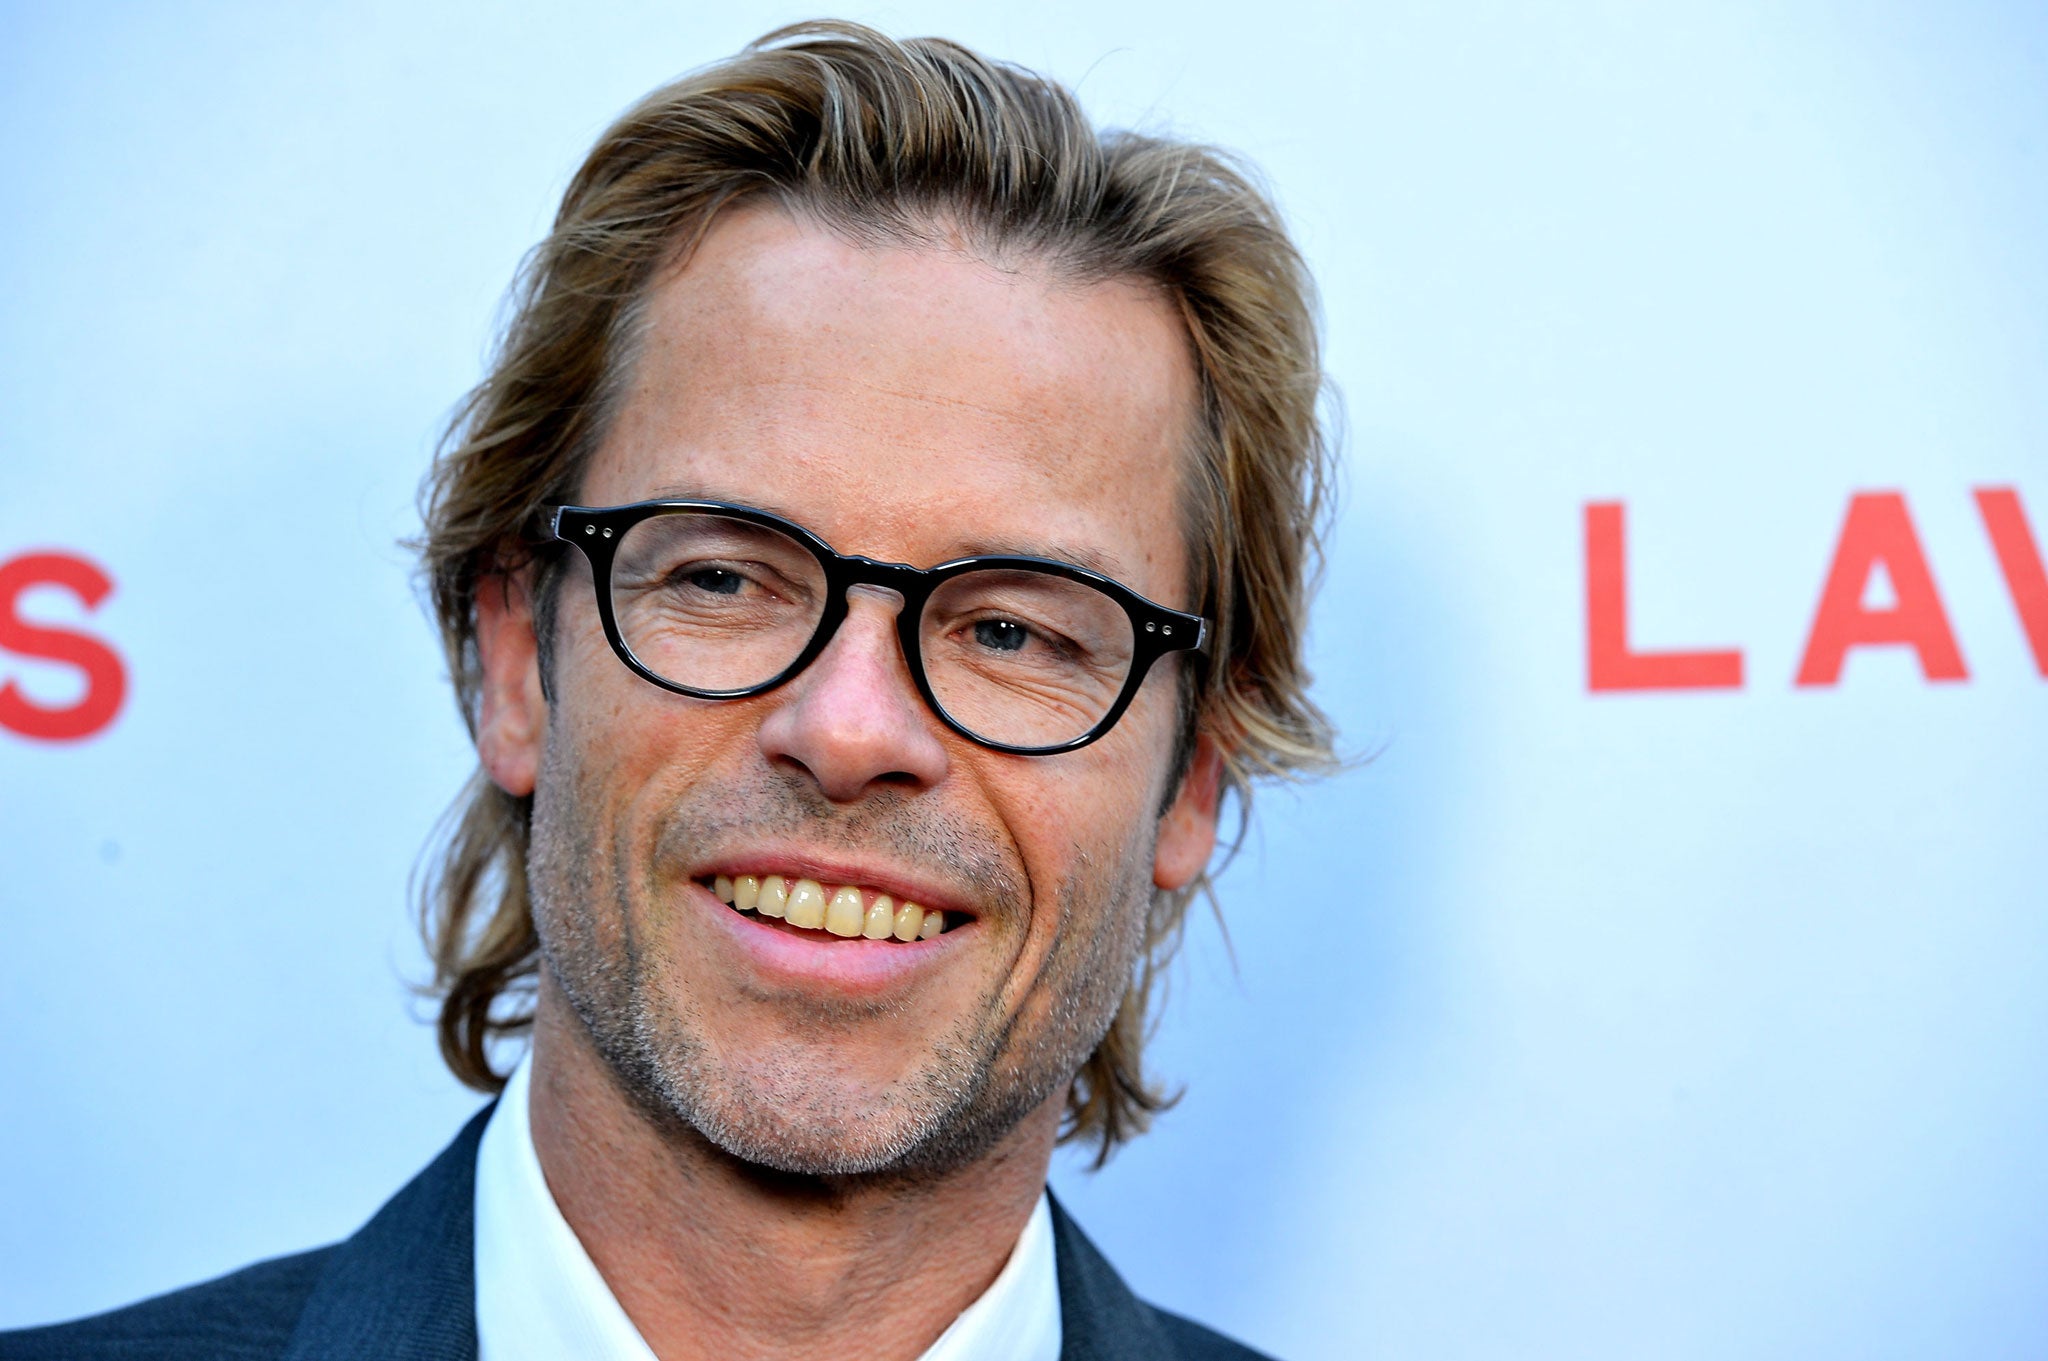 Crispin Glover, David Bowie, Jared Harris and Guy Pearce (pictured) have all played which real-life character?